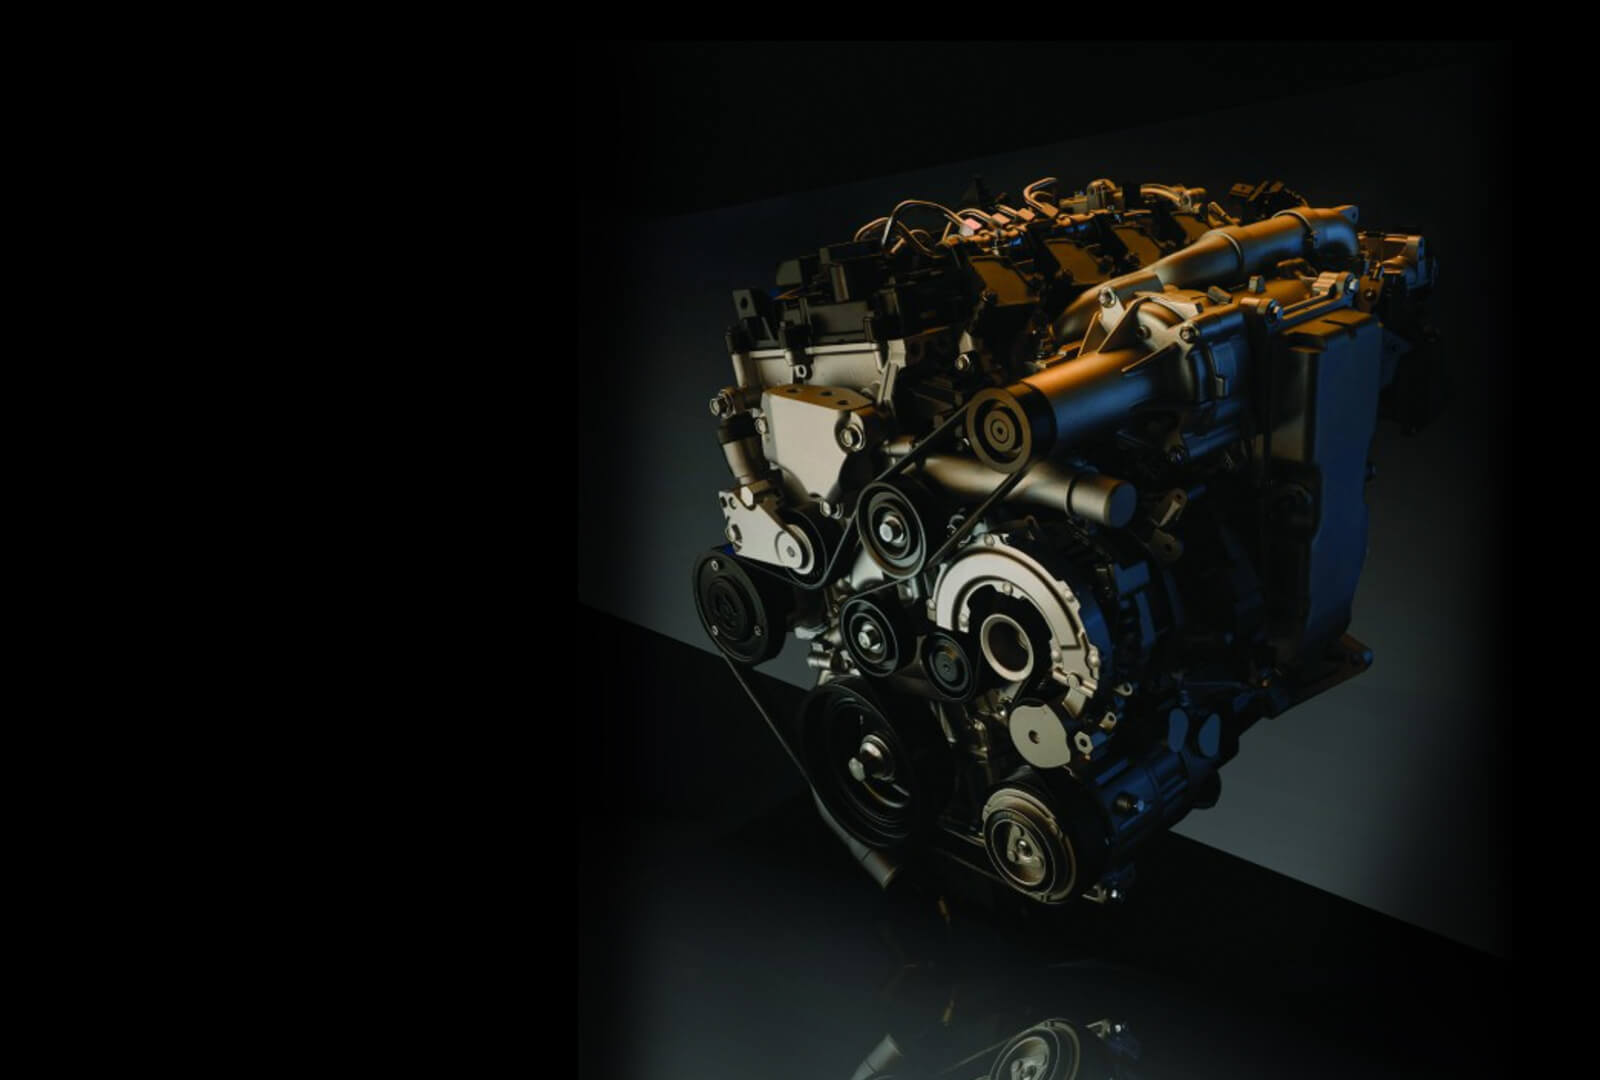 Skyactiv engine from elevated three quarter view against a black and gray background.